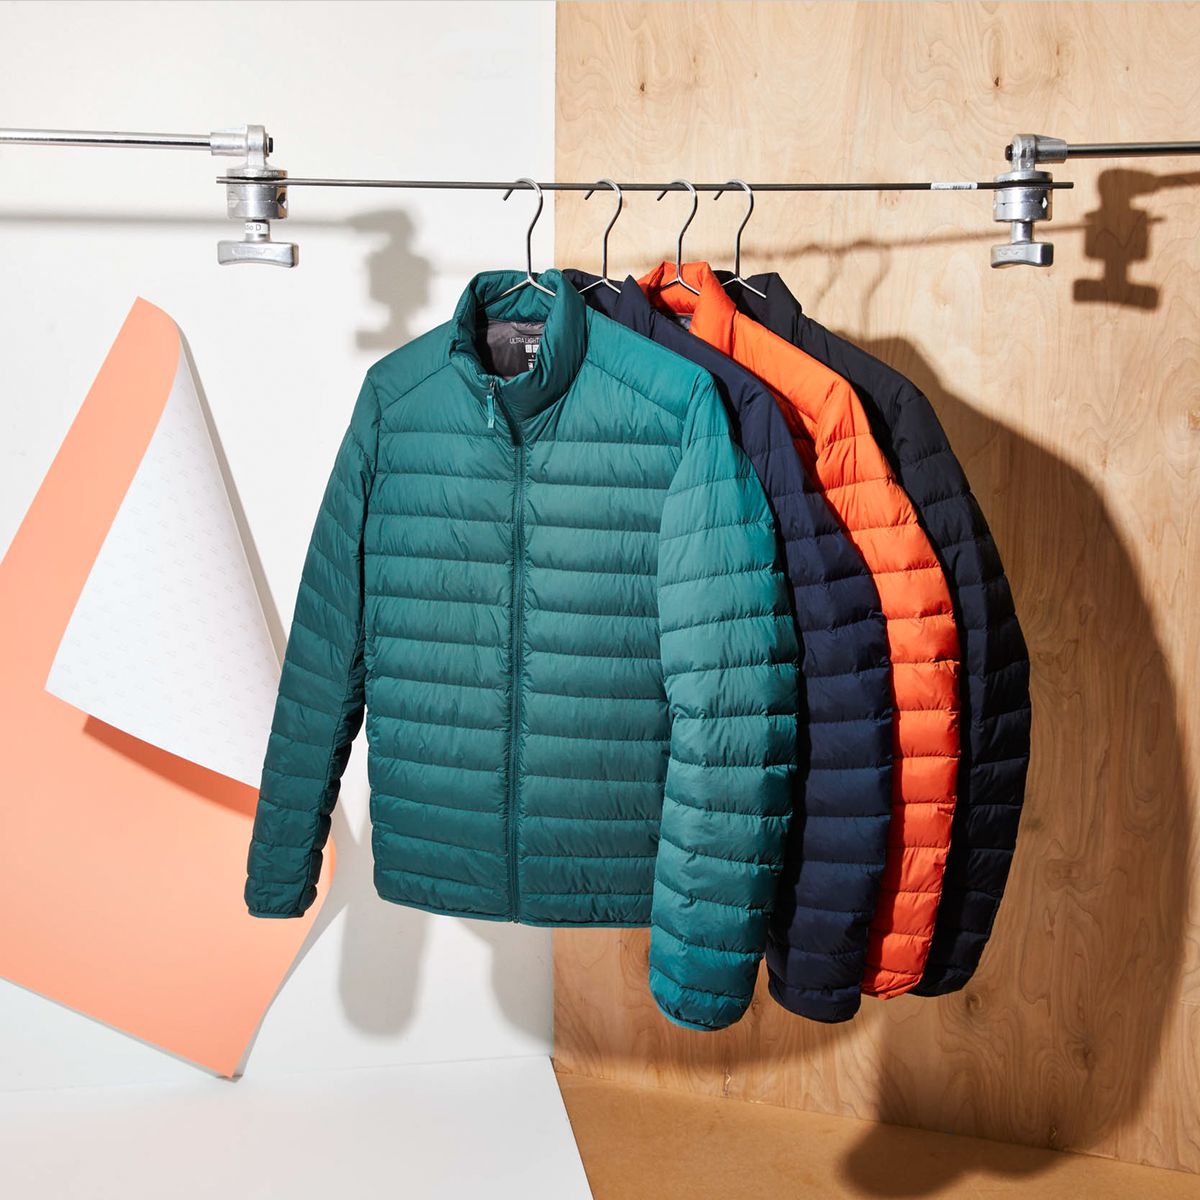 Uniqlo's Warm, Layerable, Ultra Light Down Jacket Will Keep You